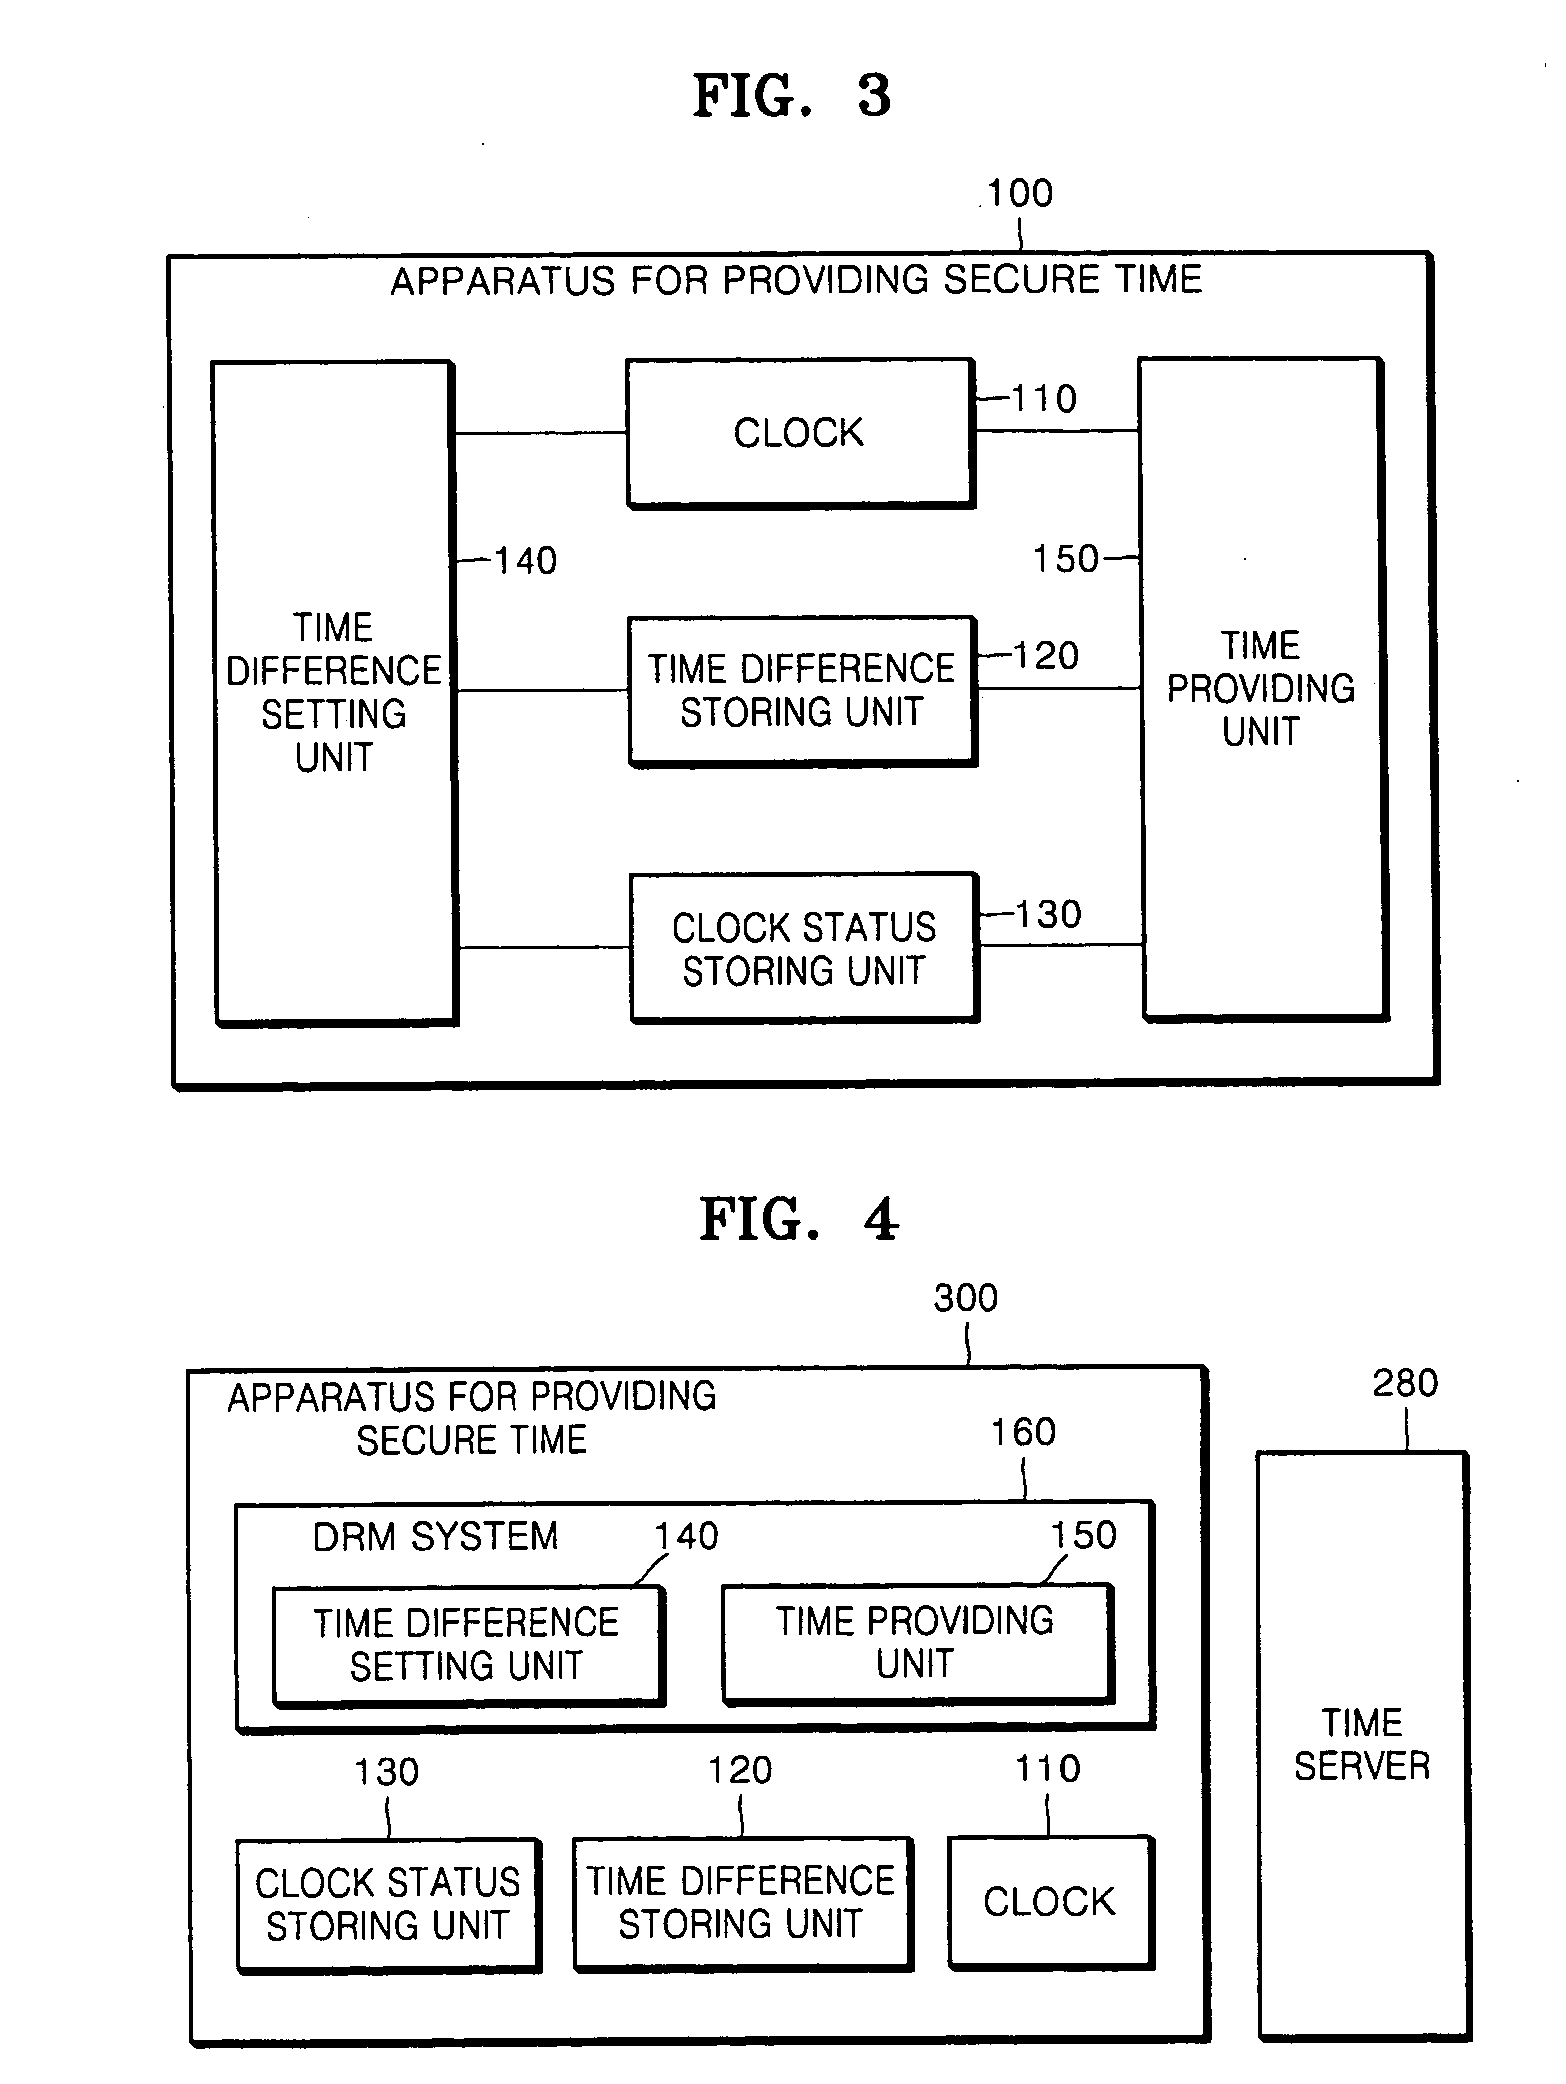 Apparatus and method for providing secure time, apparatus and method for securely reproducing contents using the secure time, and method of securely transmitting data using the secure time